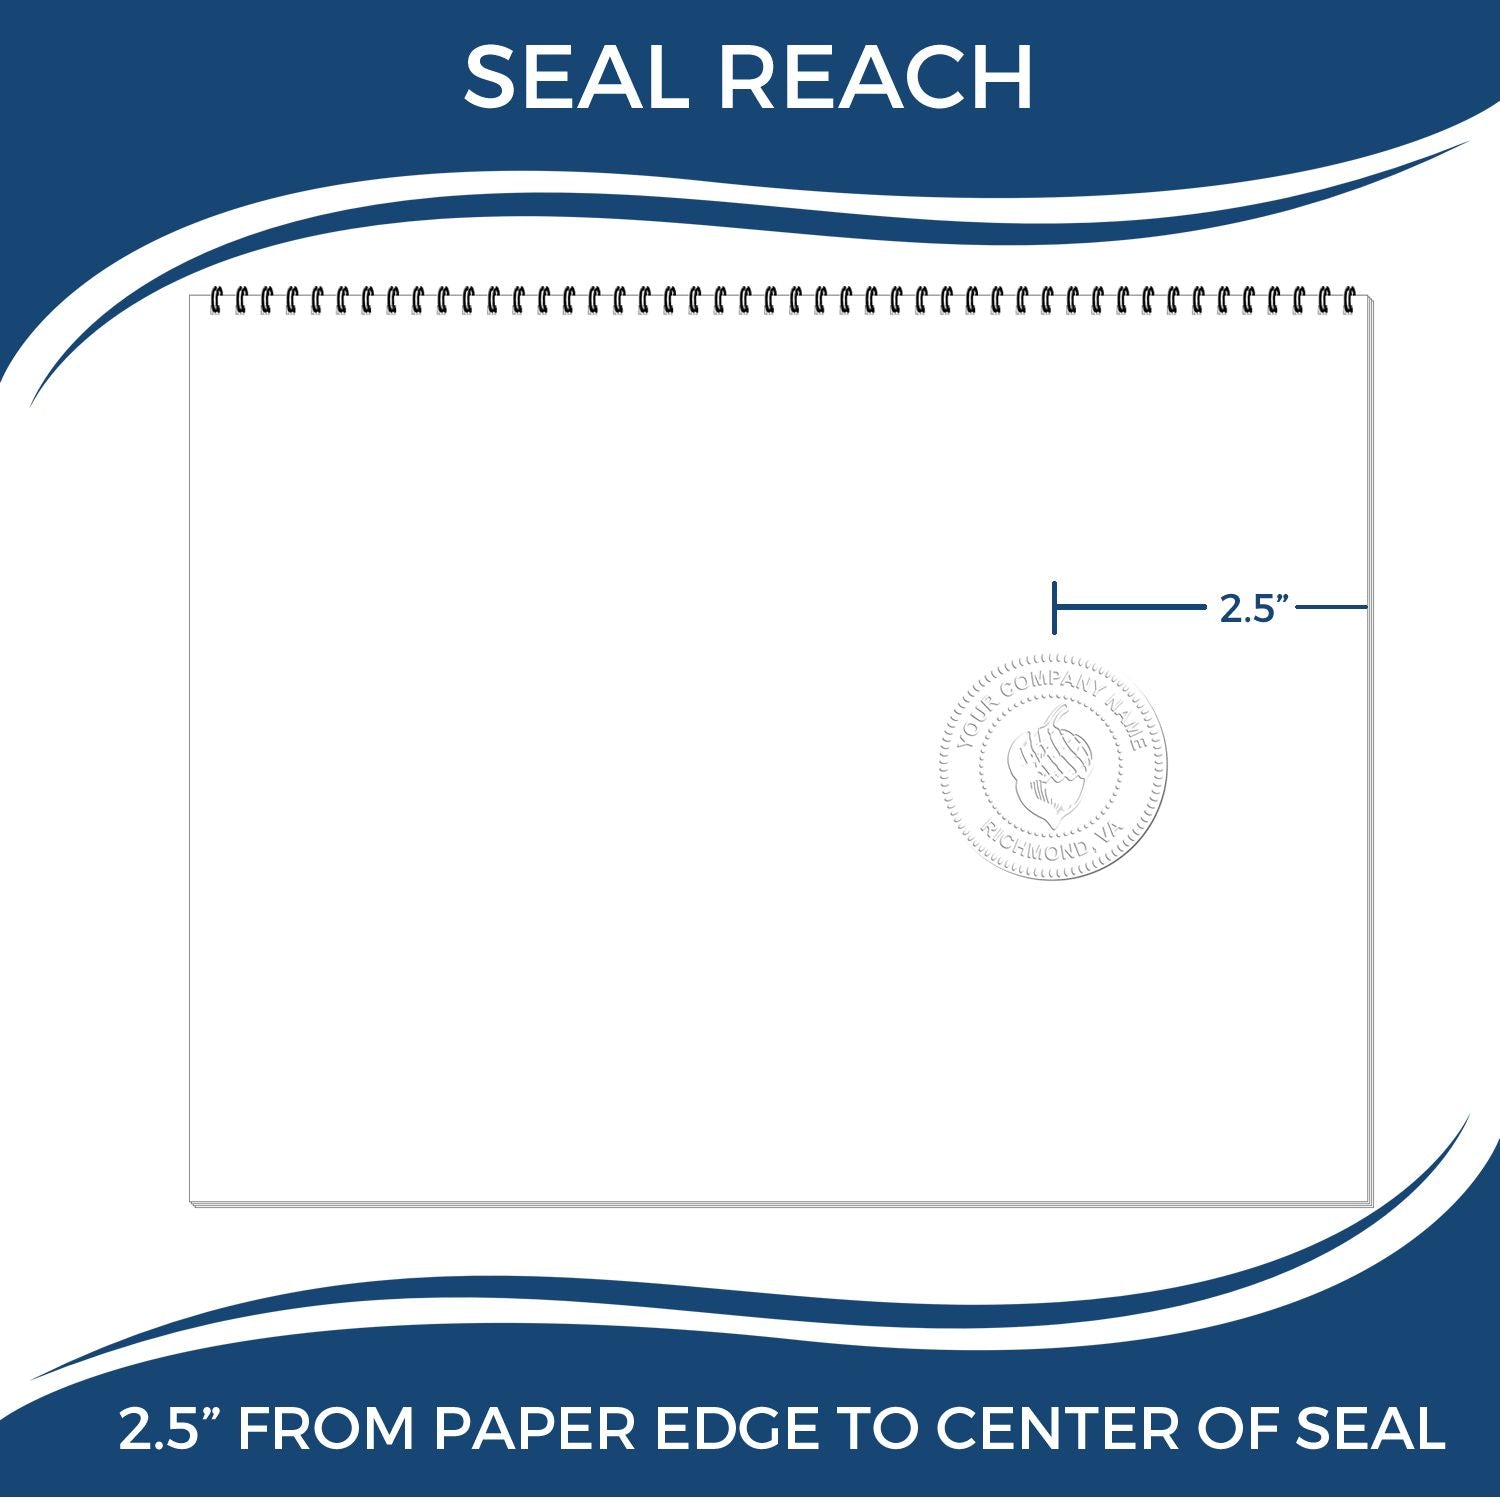 An infographic showing the seal reach which is represented by a ruler and a miniature seal image of the Heavy Duty Cast Iron Missouri Engineer Seal Embosser